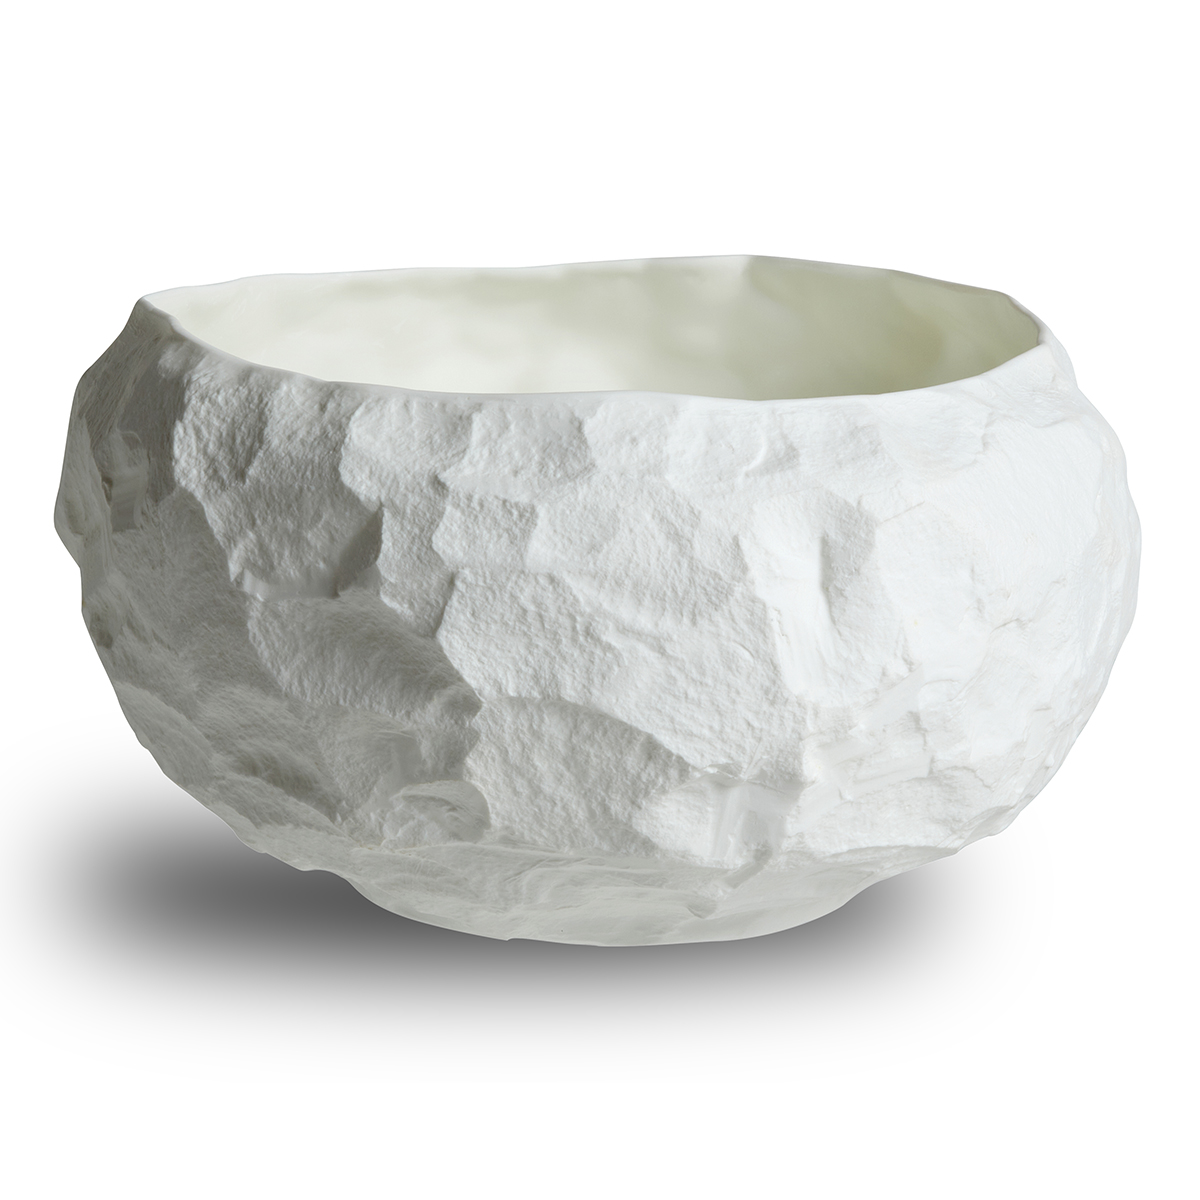 Largest Deep Bowl from Crockery White by 1882 Ltd and Max Lamb